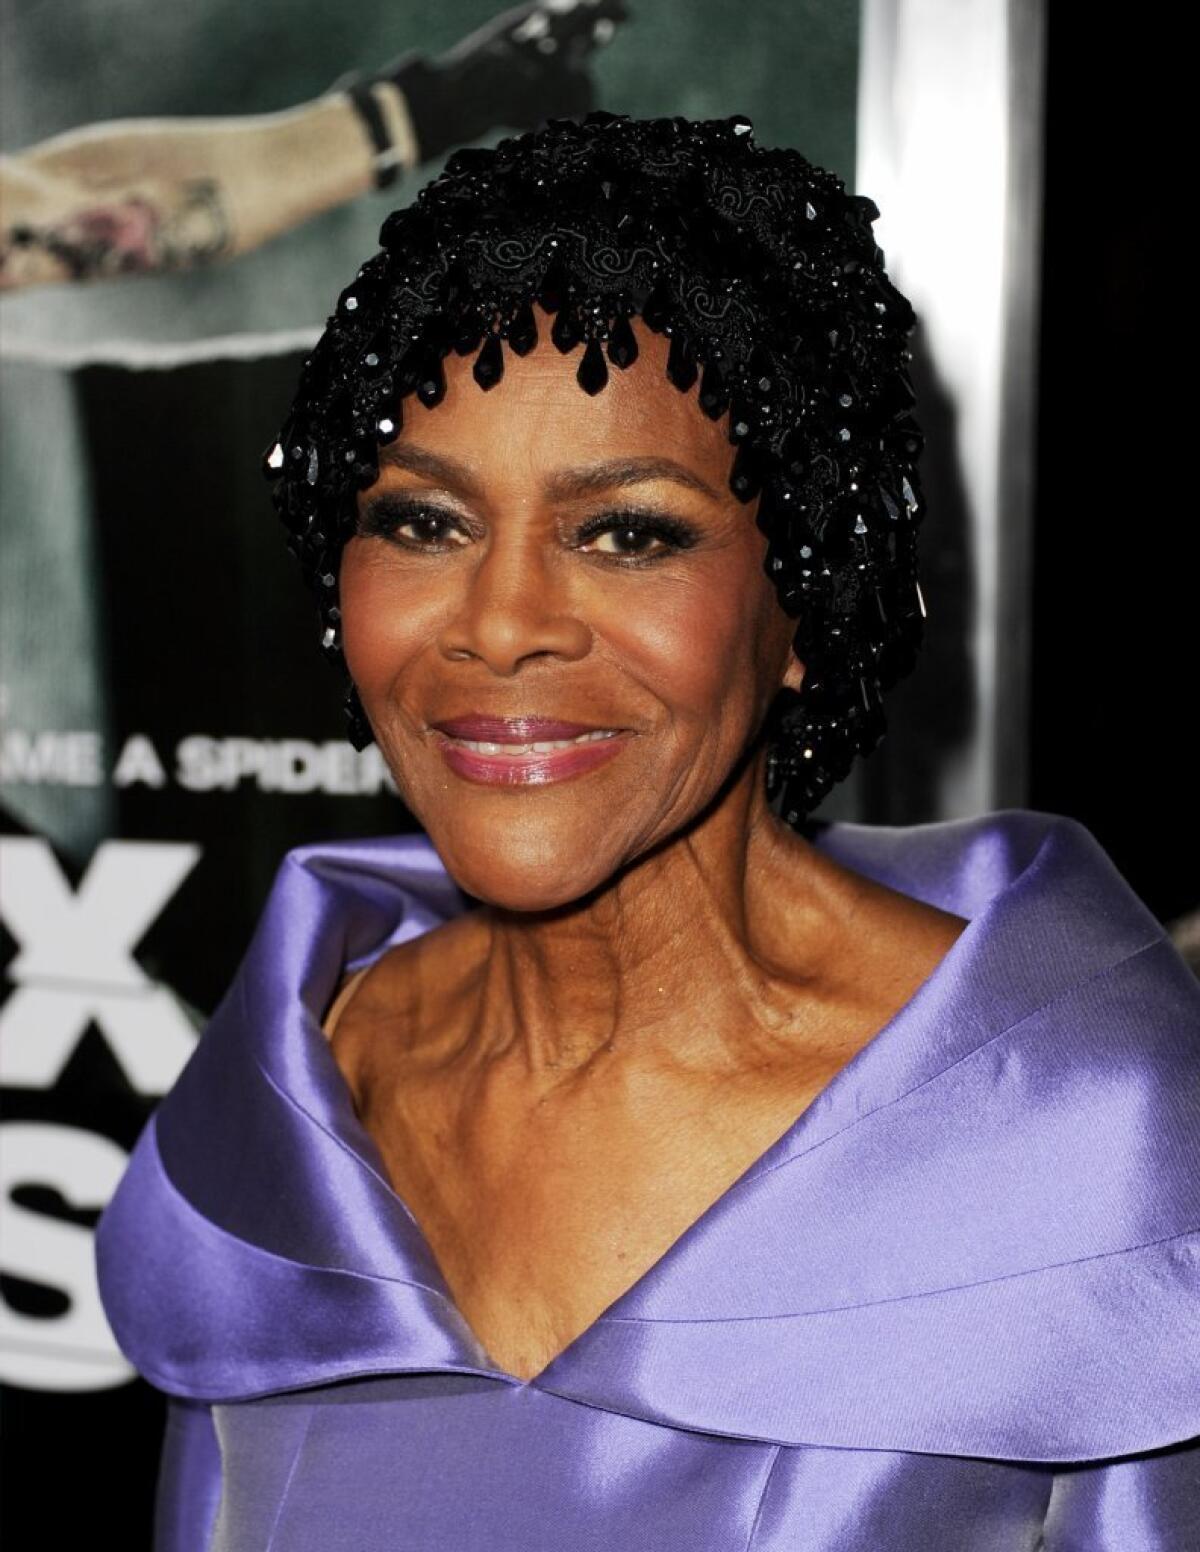 Cicely Tyson arrives at the premiere of "Alex Cross" at the Arclight Theater in October.